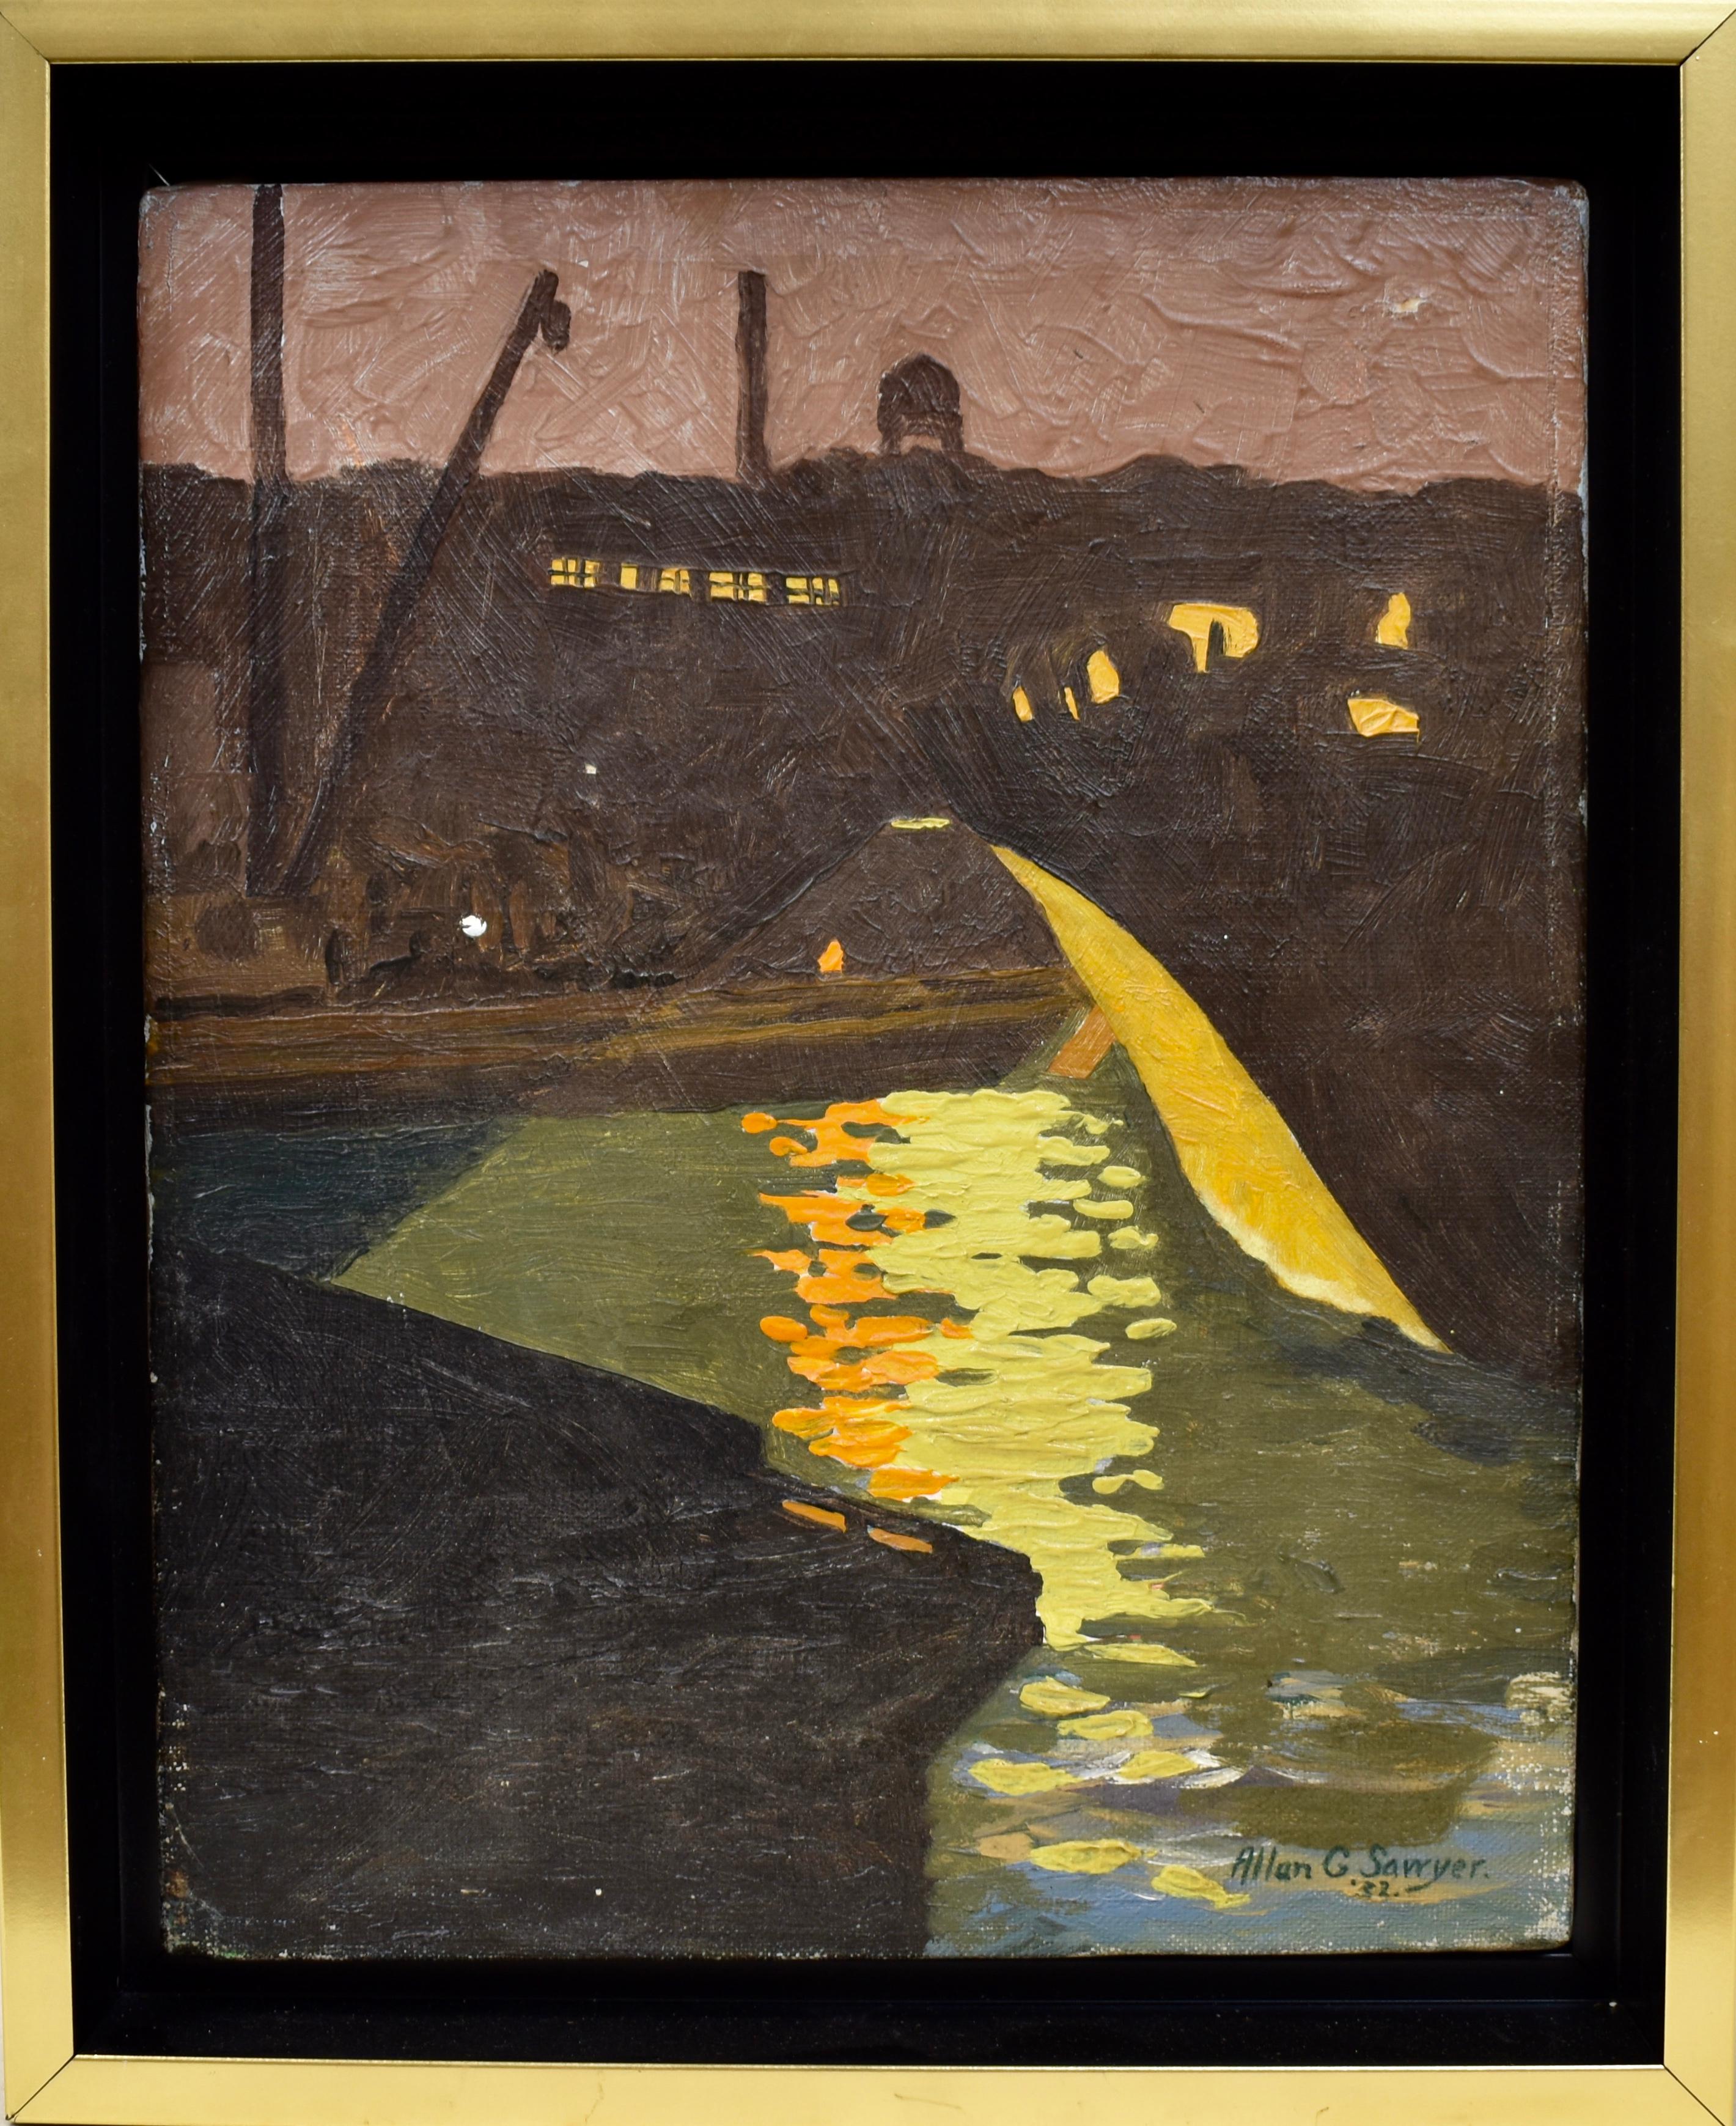 Modernist moonlit harbor view by Allan Sawyer.  Oil on canvas, circa 1932.  Signed lower right.  Displayed in a modernist frame.  Image size, 8.5"L x 10.75"H.